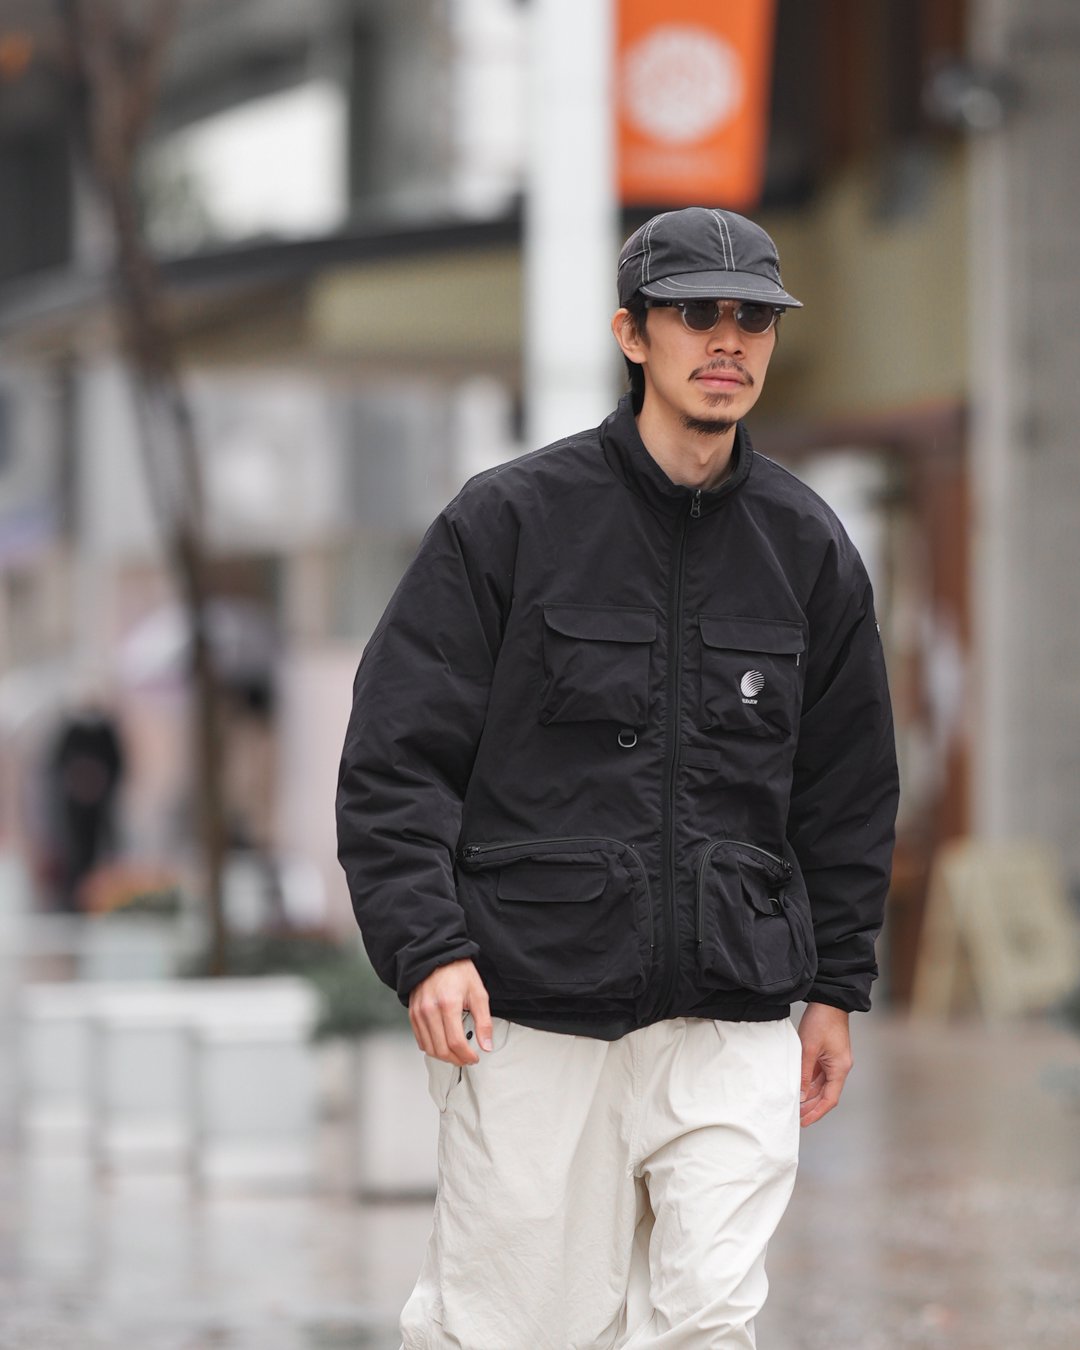 Hellrazor WEVE QUILTED JACKET - ナイロンジャケット